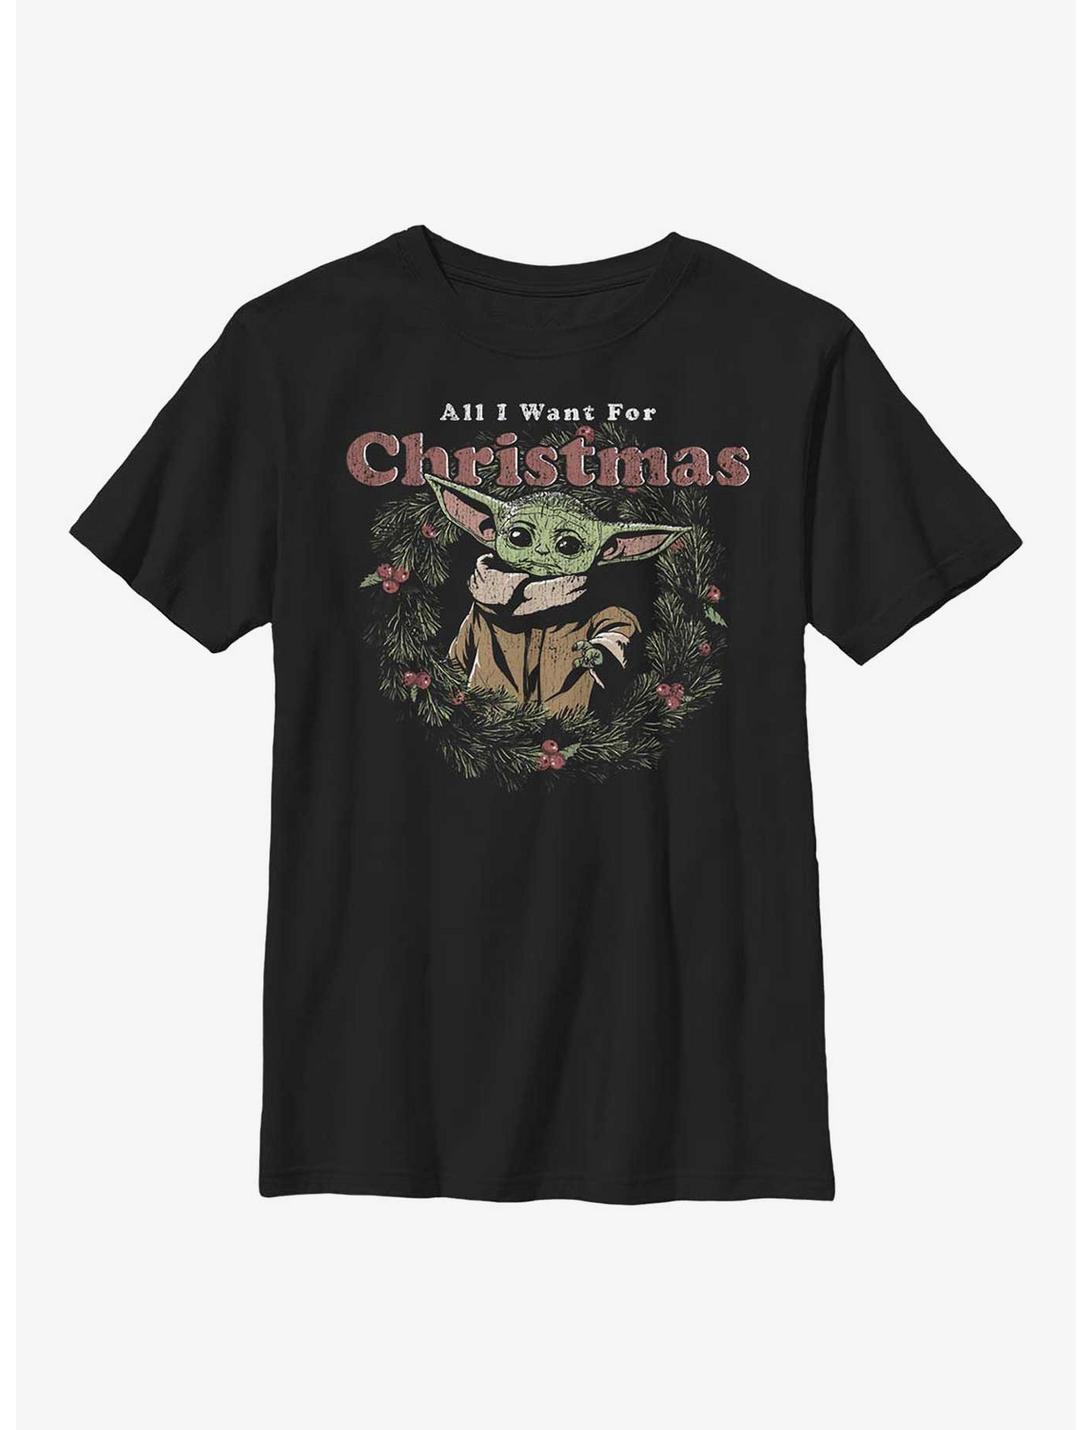 Star Wars The Mandalorian The Child Want For Christmas Youth T-Shirt, BLACK, hi-res